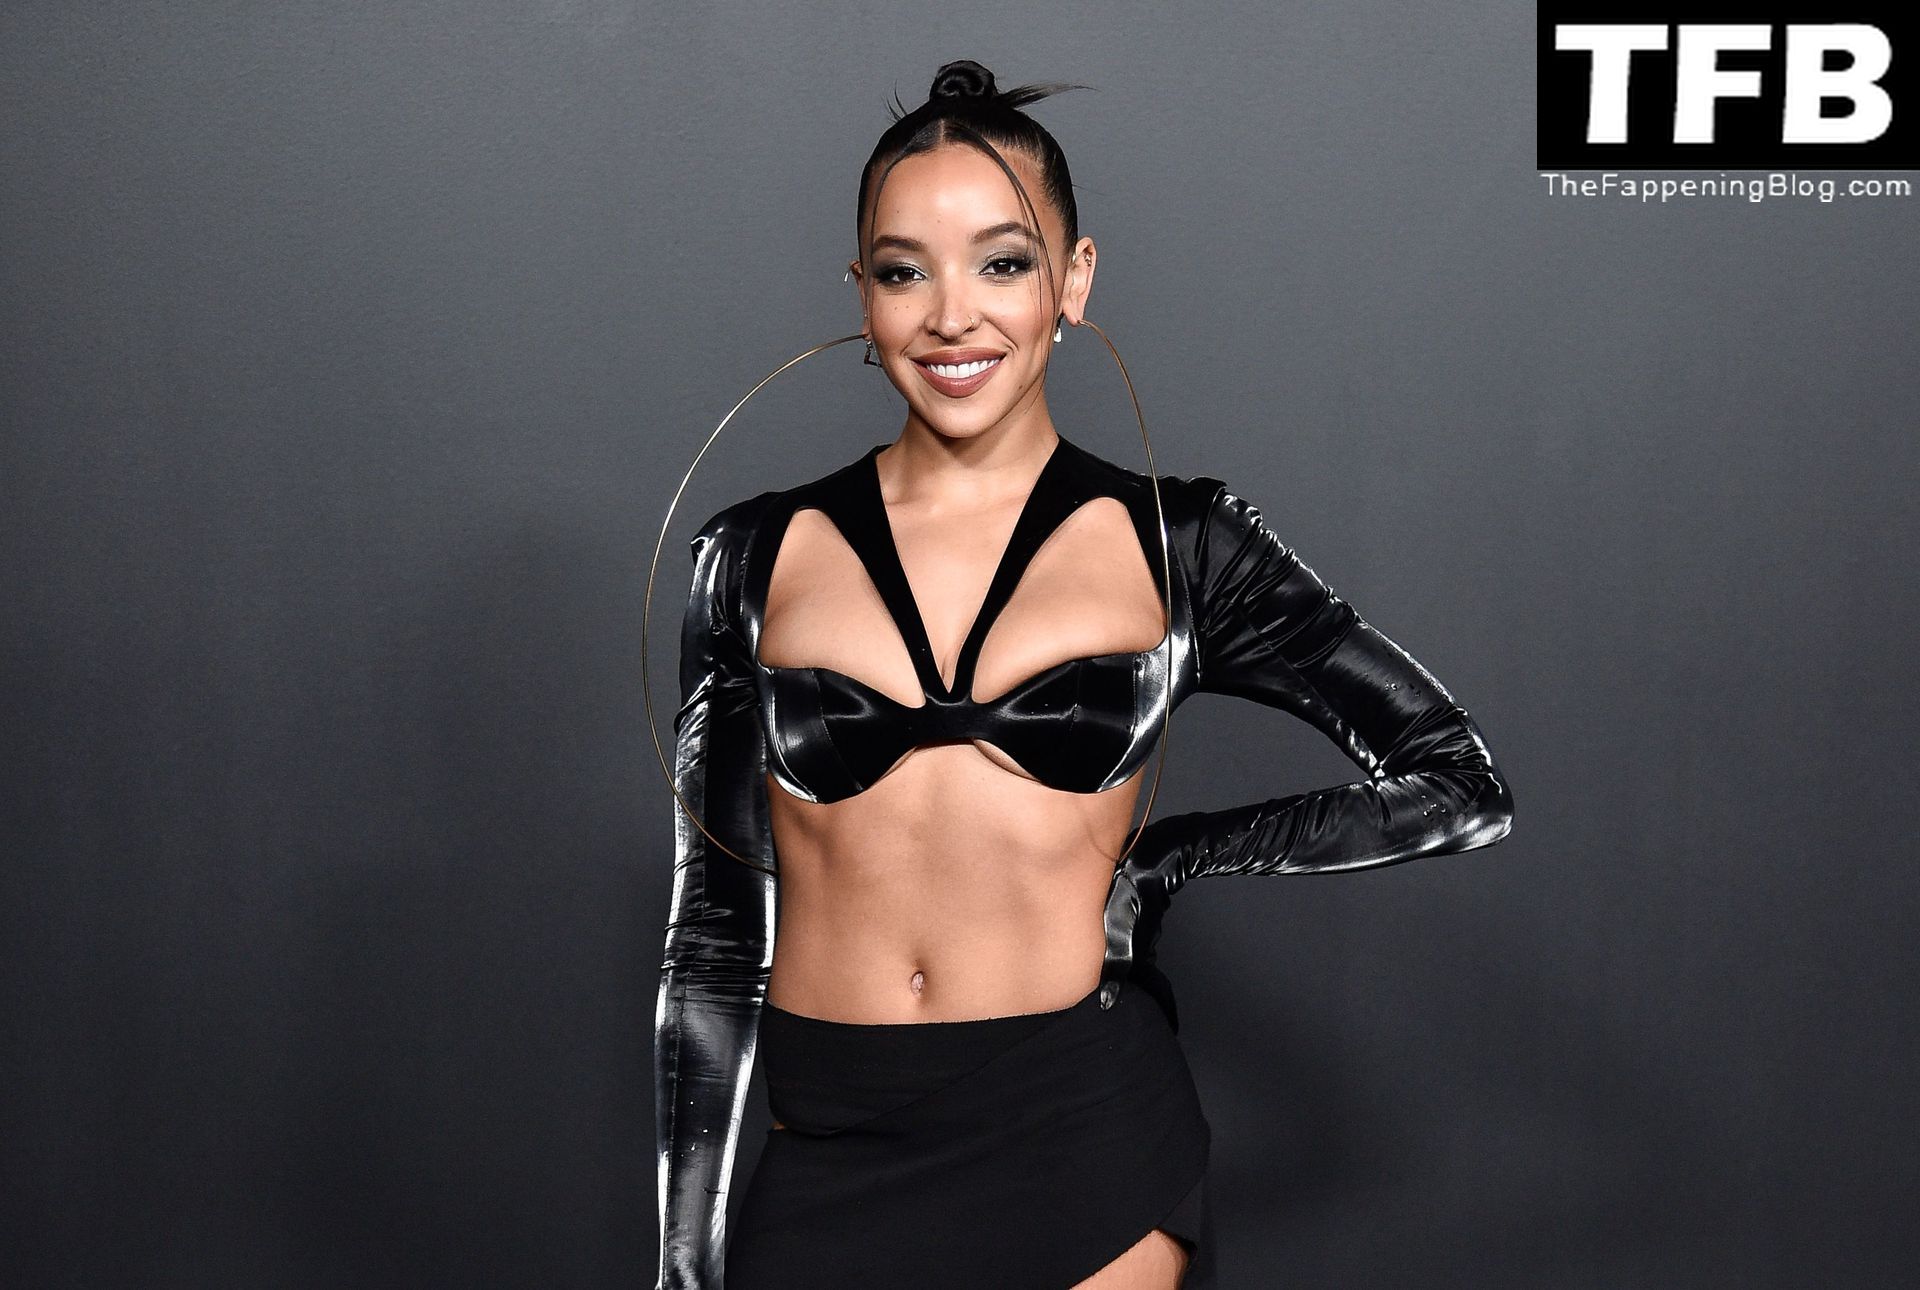 Tinashe-Sexy-The-Fappening-Blog-29.jpg